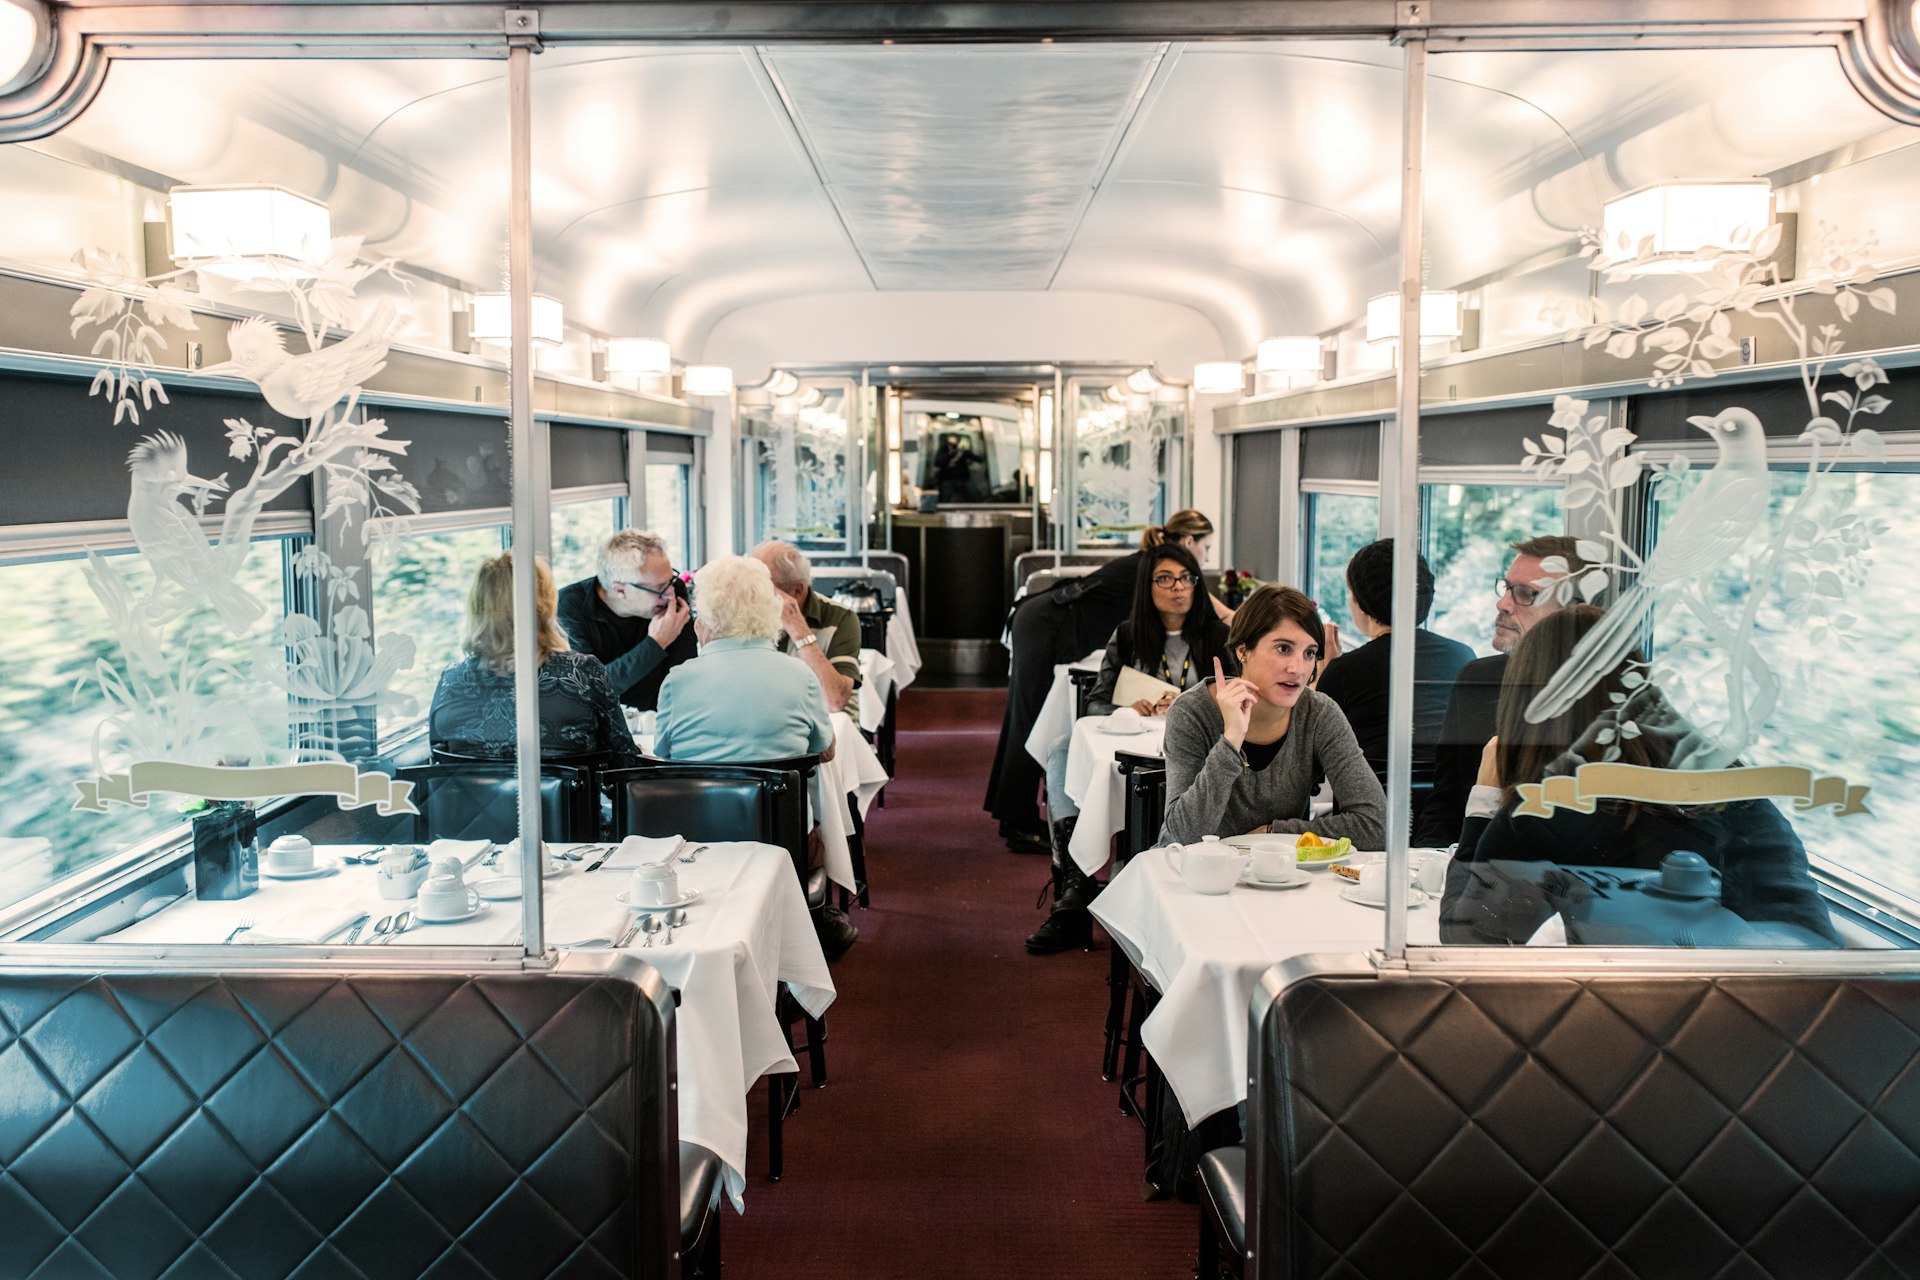 The Canadian dining carriage